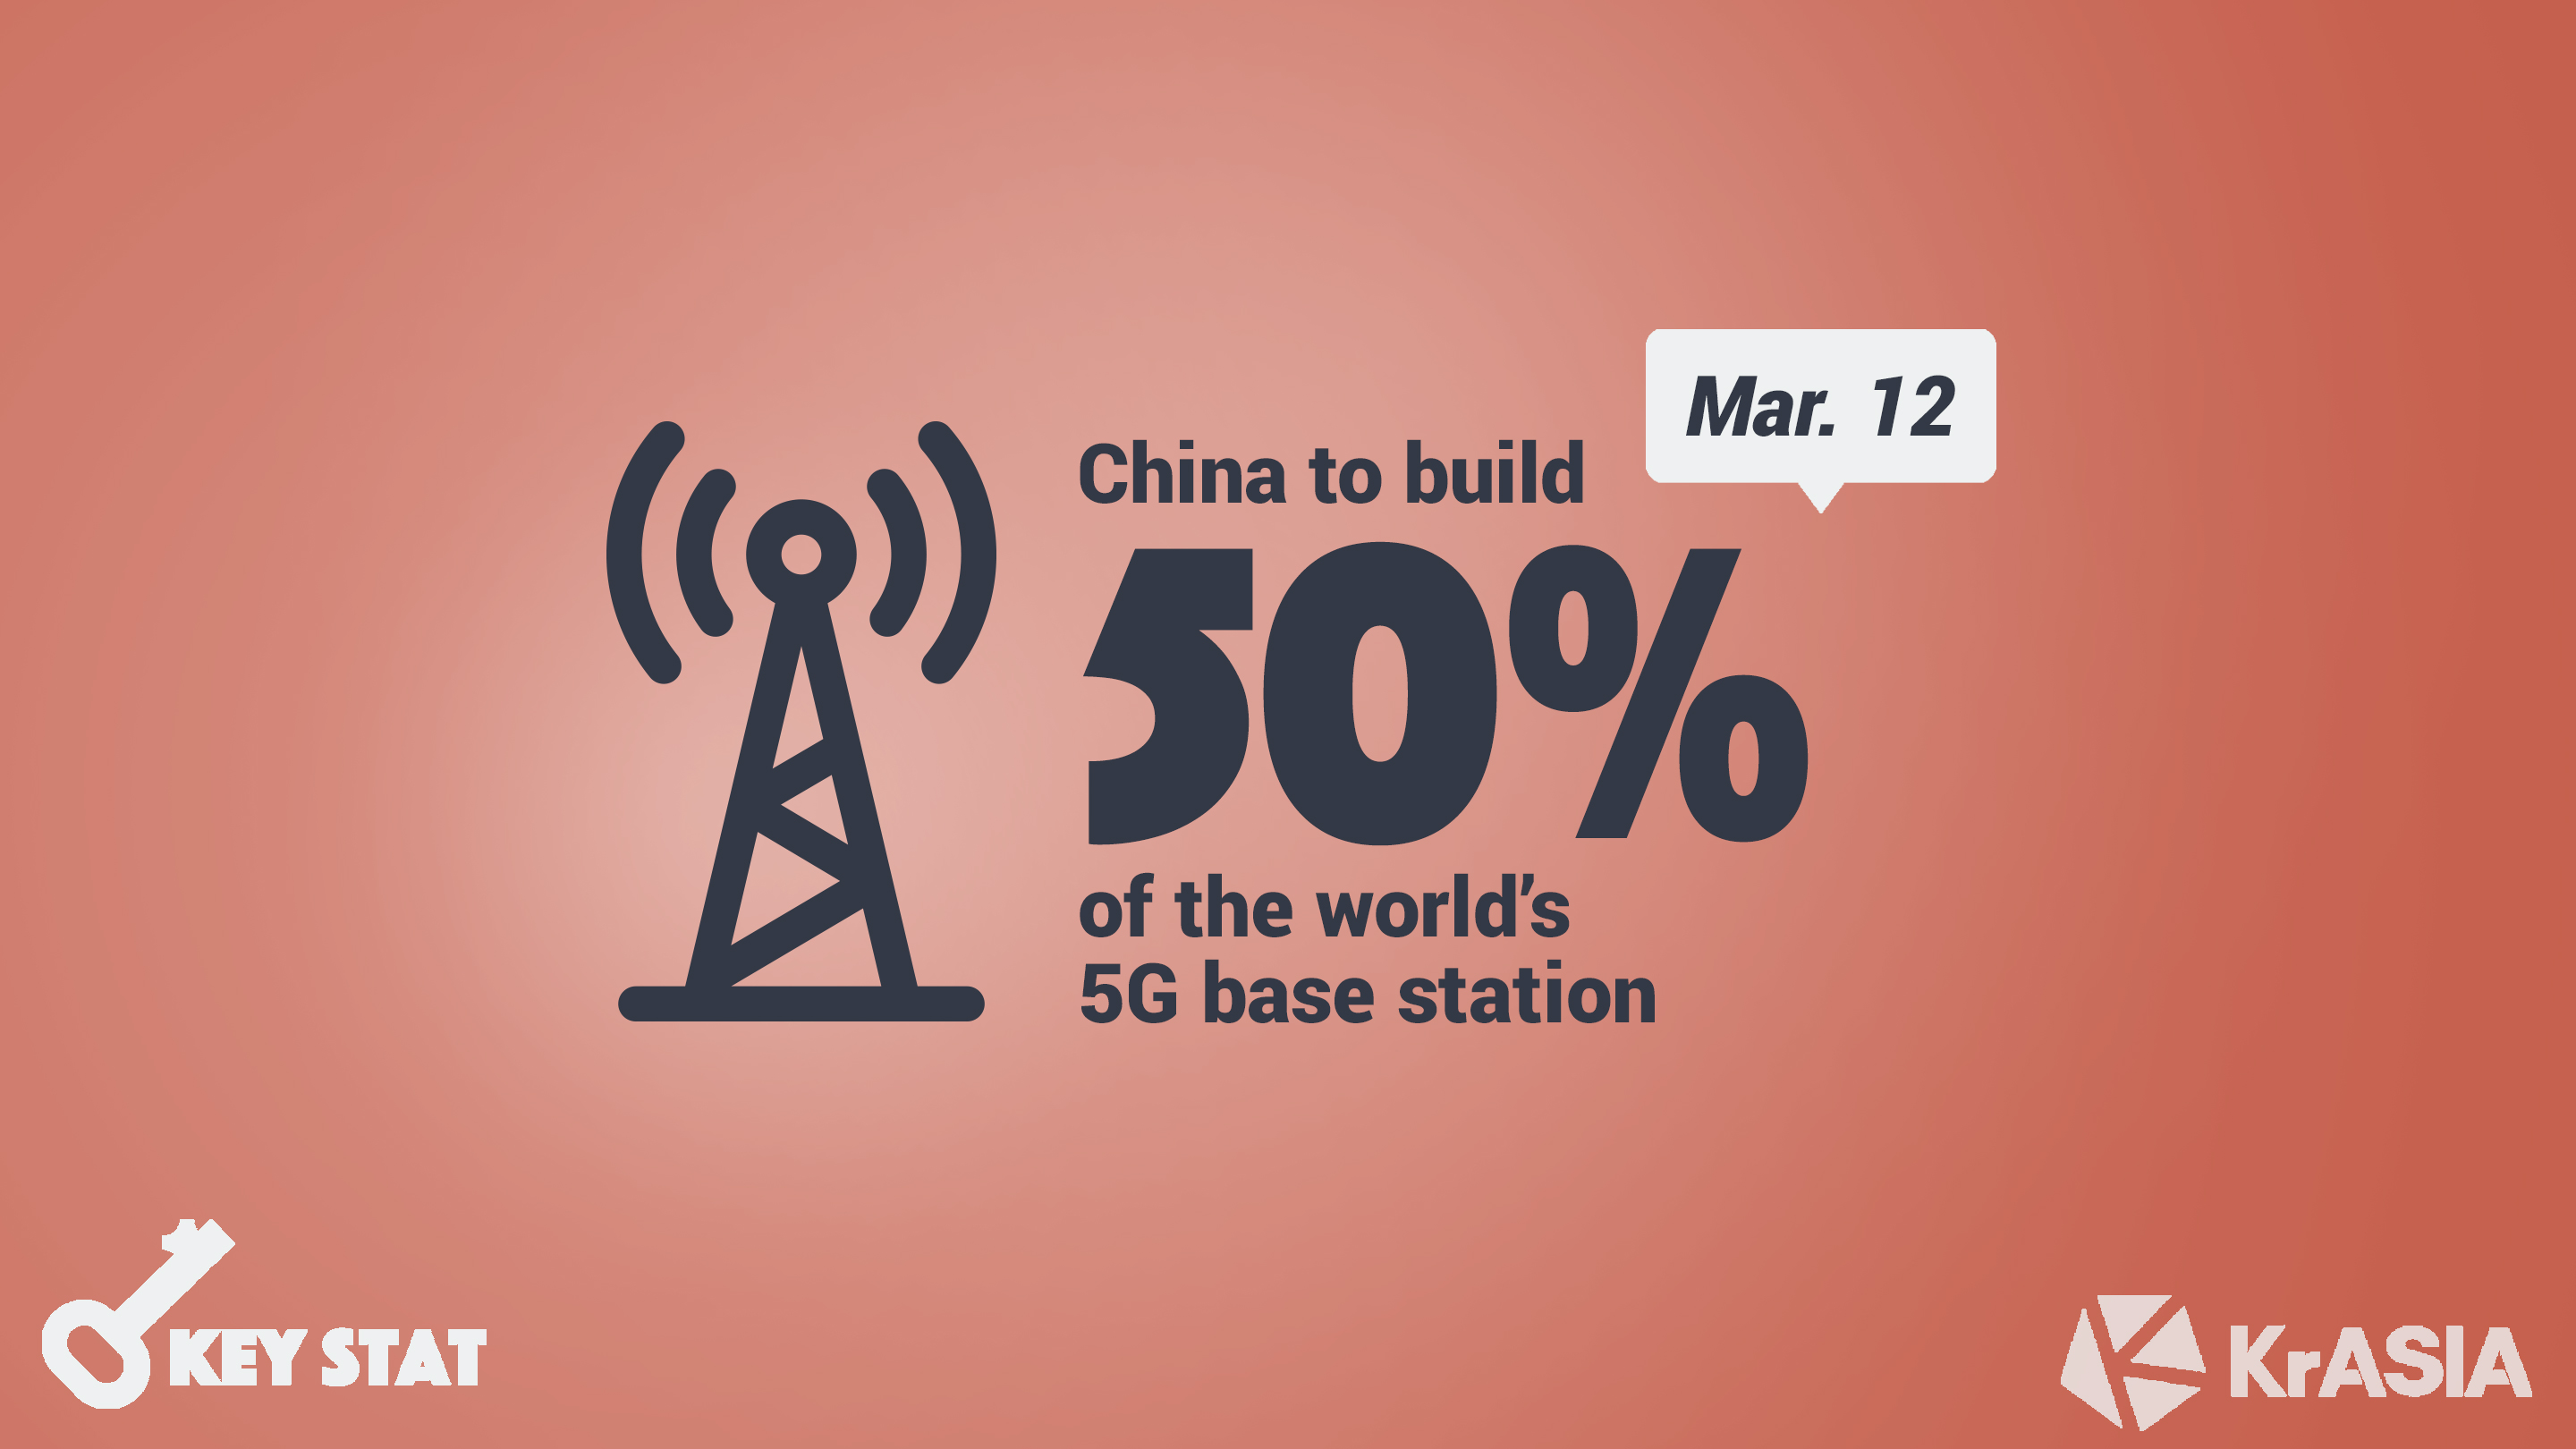 KEY STAT | Huawei expects China to have 50% of the world’s 5G base stations by end of 2020